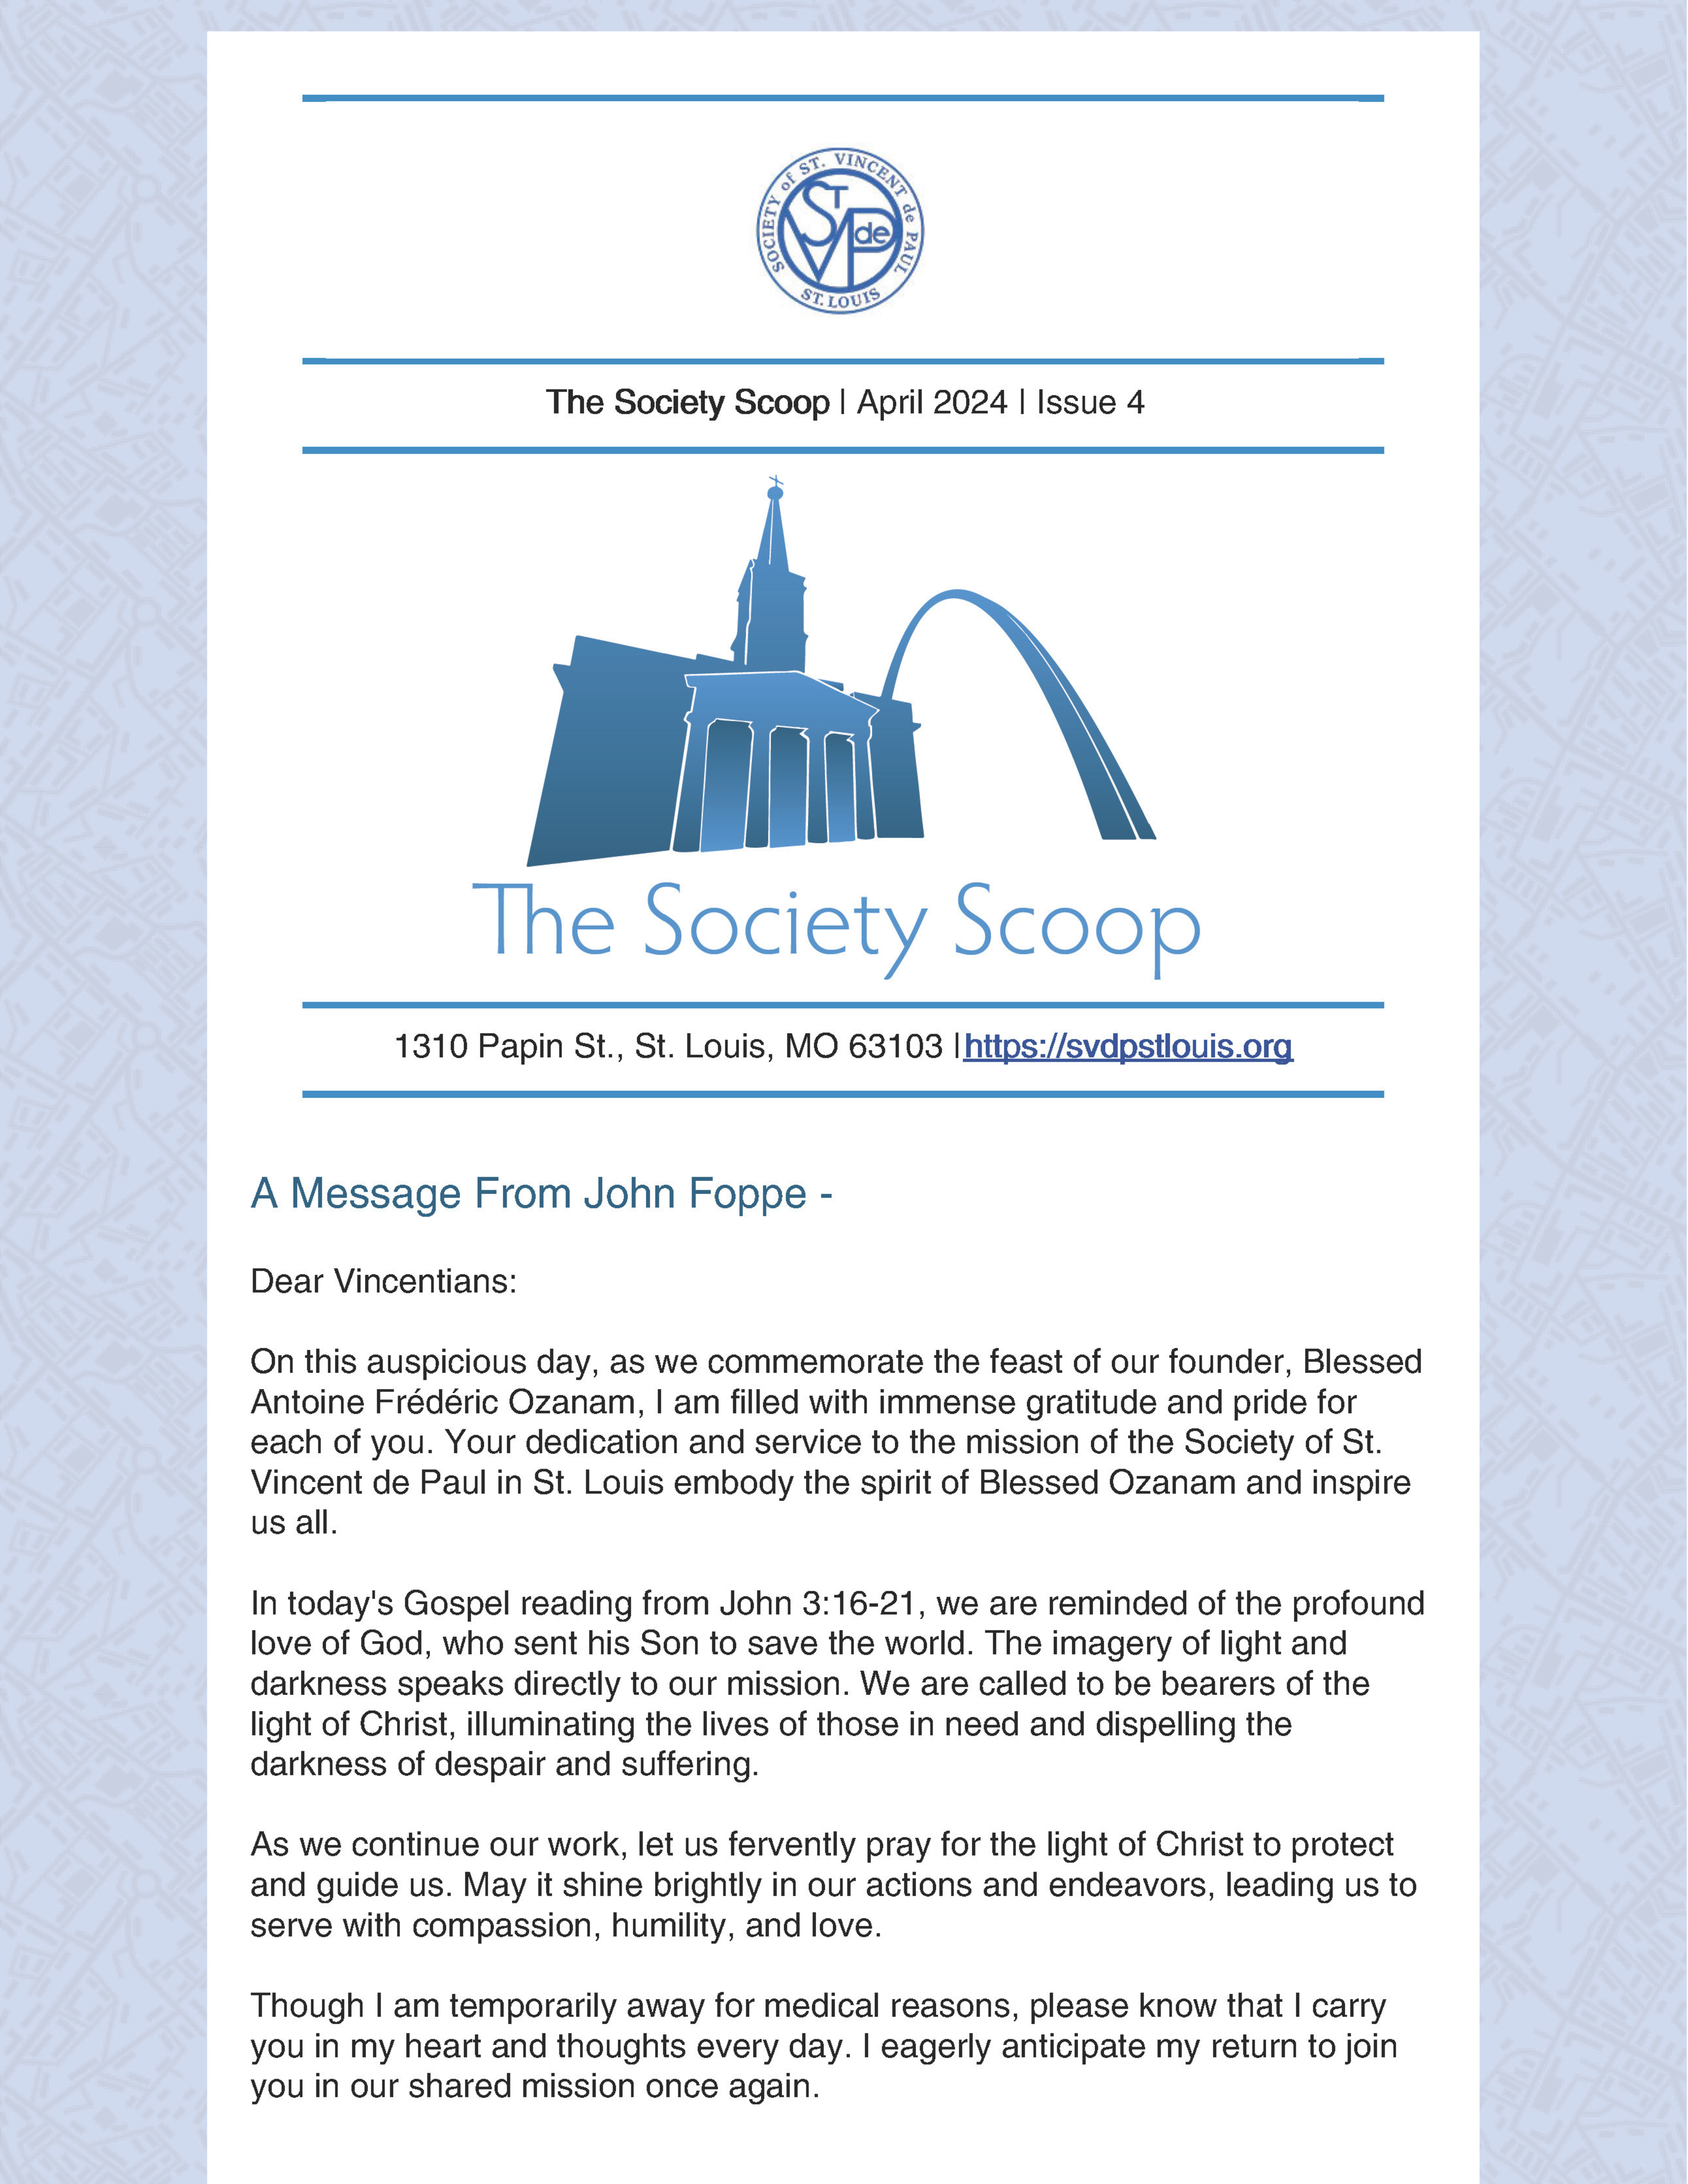 Front page of the April 2024 issue of The Society Scoop Vincentian Newsletter